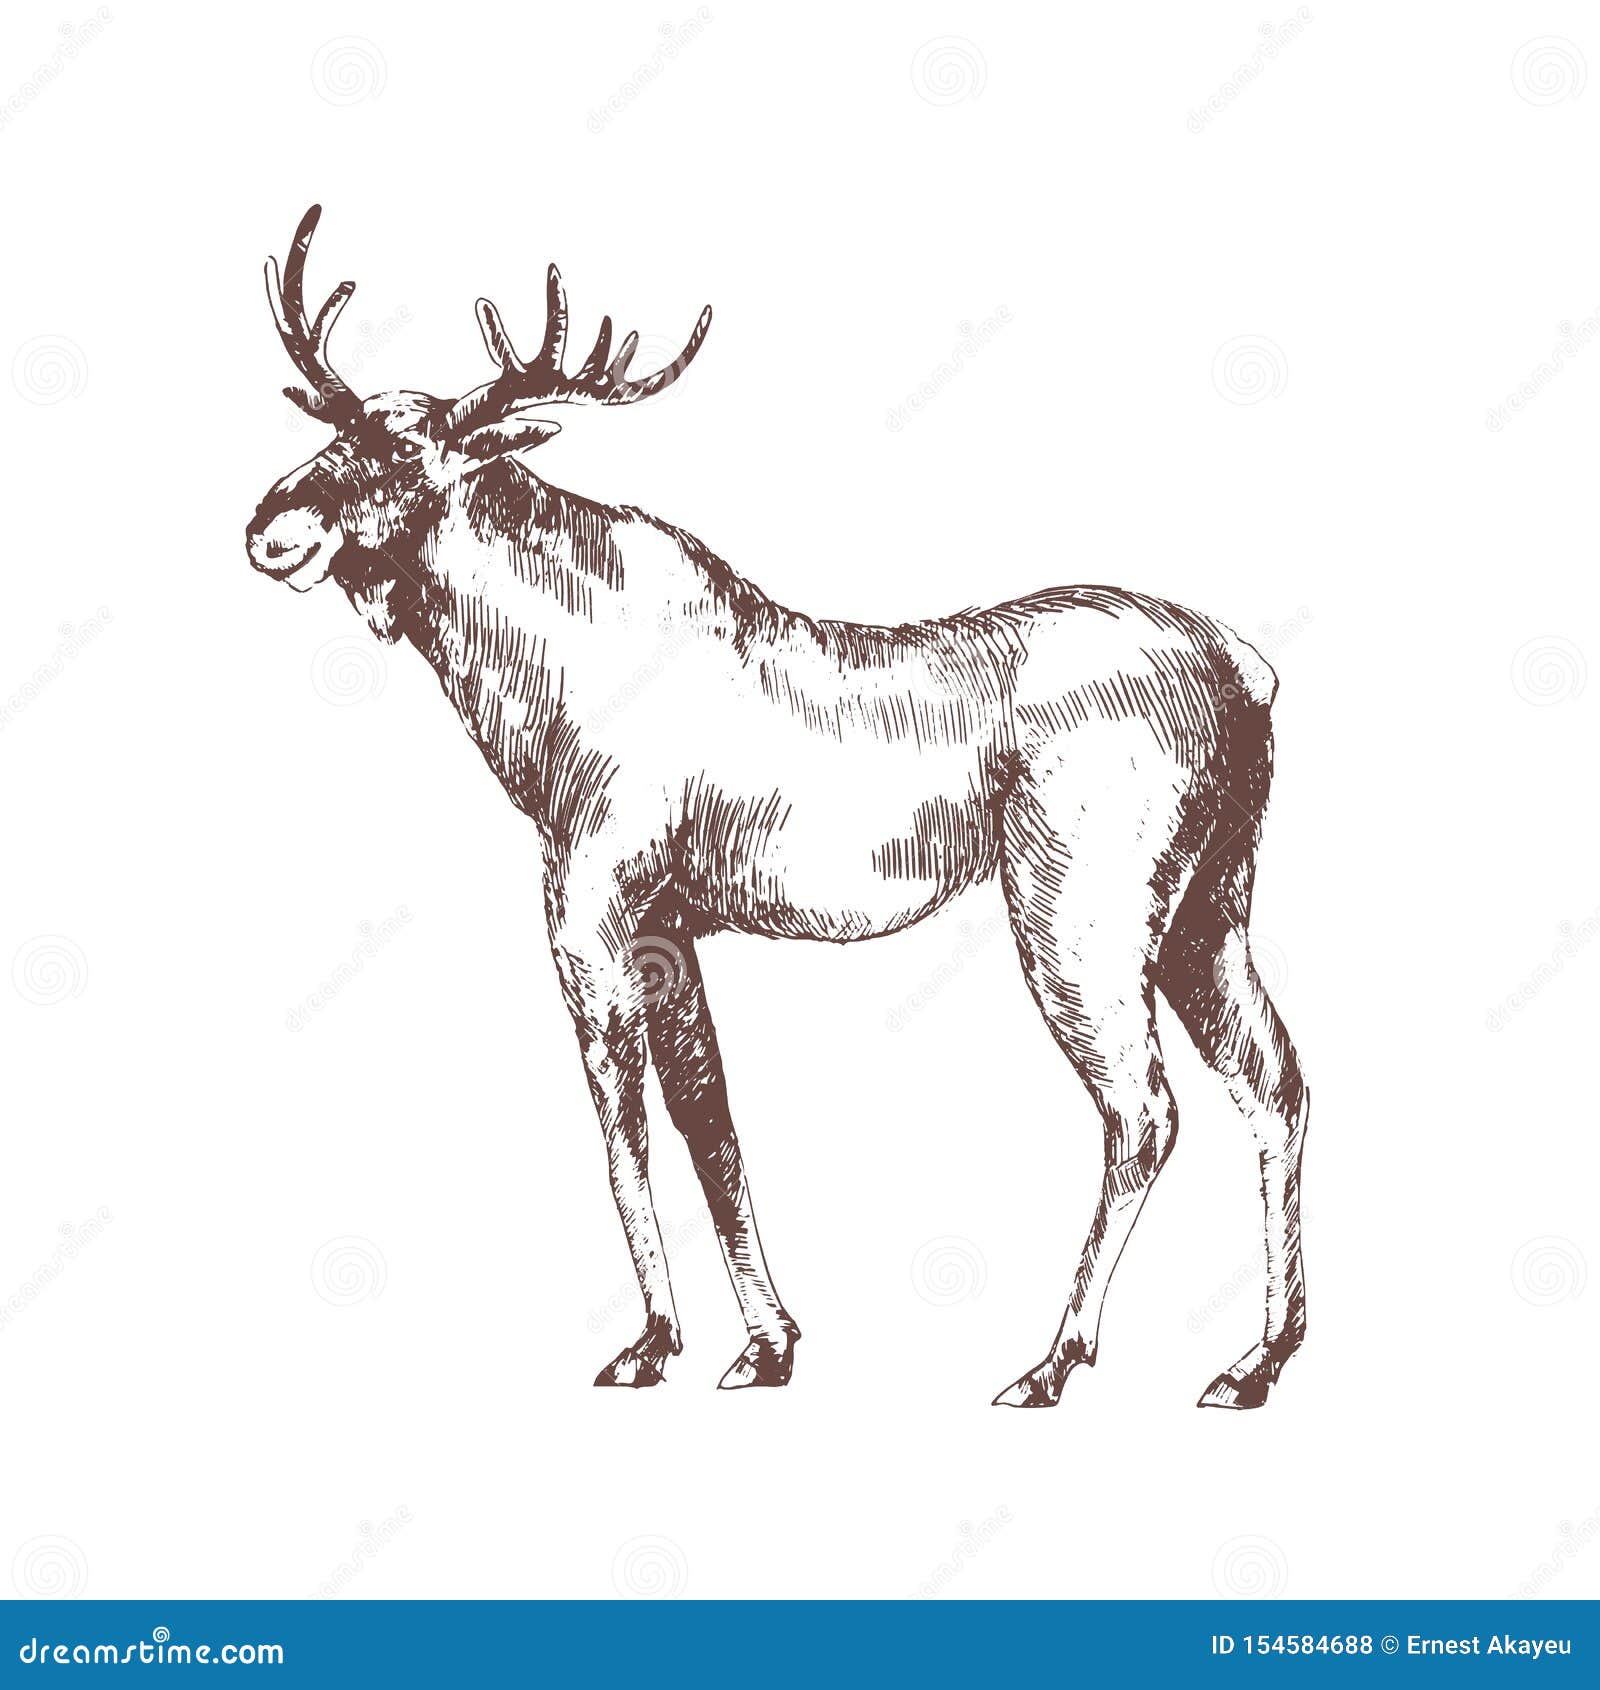 moose or elk hand drawn with contour lines on white background. monochrome sketch drawing of wild forest herbivorous